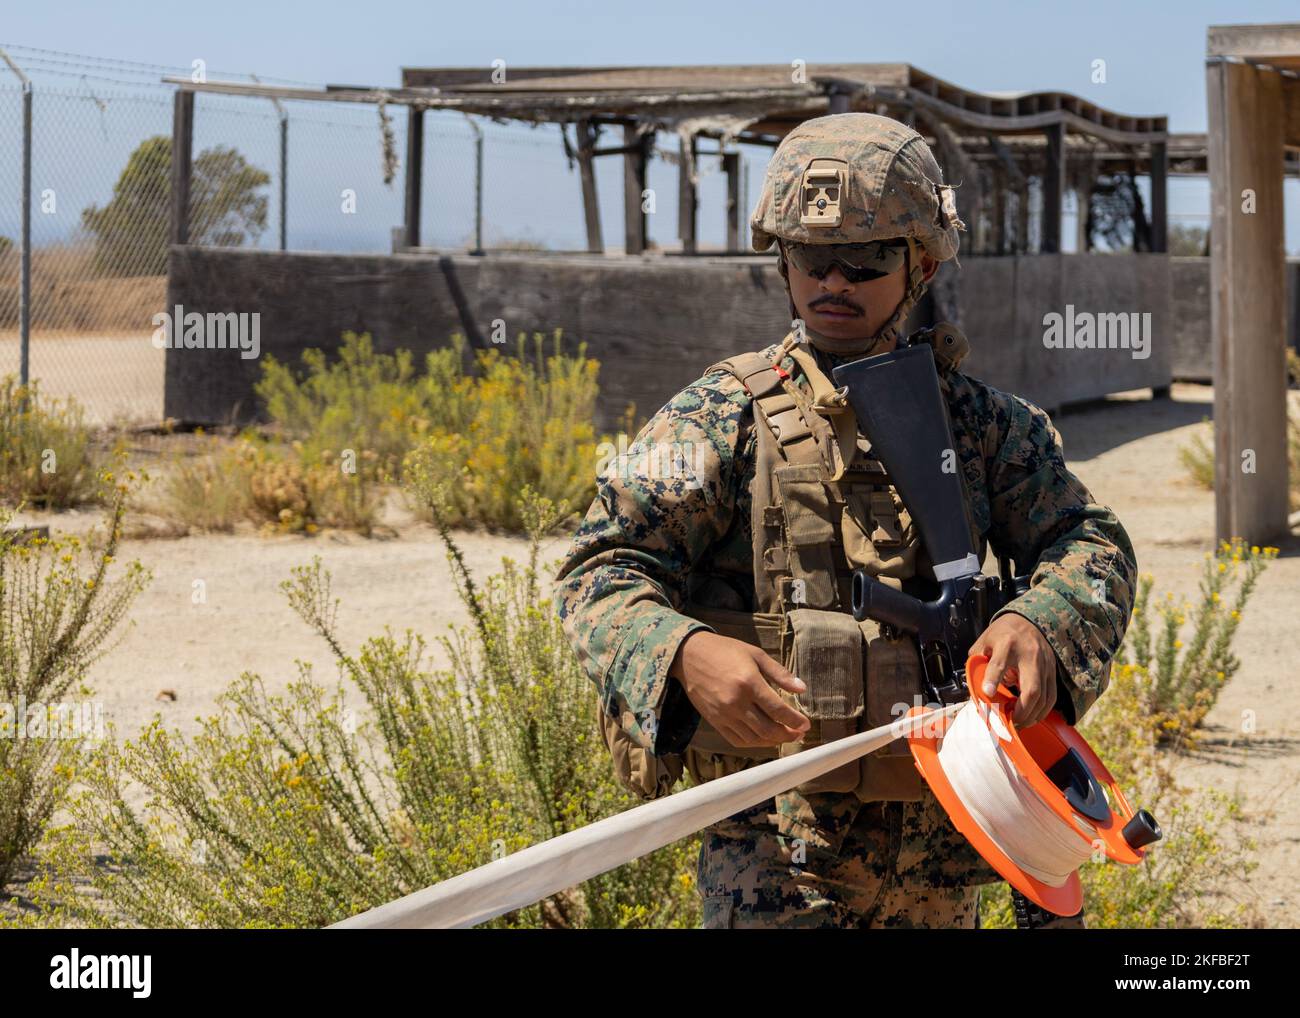 MARINE CORPS BASE CAMP PENDLETON, California (Sept. 2, 2022) - U.S. Marine Corps Cpl. Deether Edralin, a searching NCO with Combat Logistic Battalion 13, 13th Marine Expeditionary Unit, sets up engineer tape in preparation for an Evacuation Control Center exercise. A force in readiness, the 13th MEU trains to rapidly respond to crises across all domains. Marines and Sailors of the 13th MEU are embarked aboard the Makin Island Amphibious Ready Group (ARG) conducting integrated training operations in U.S. 3rd Fleet. Stock Photo